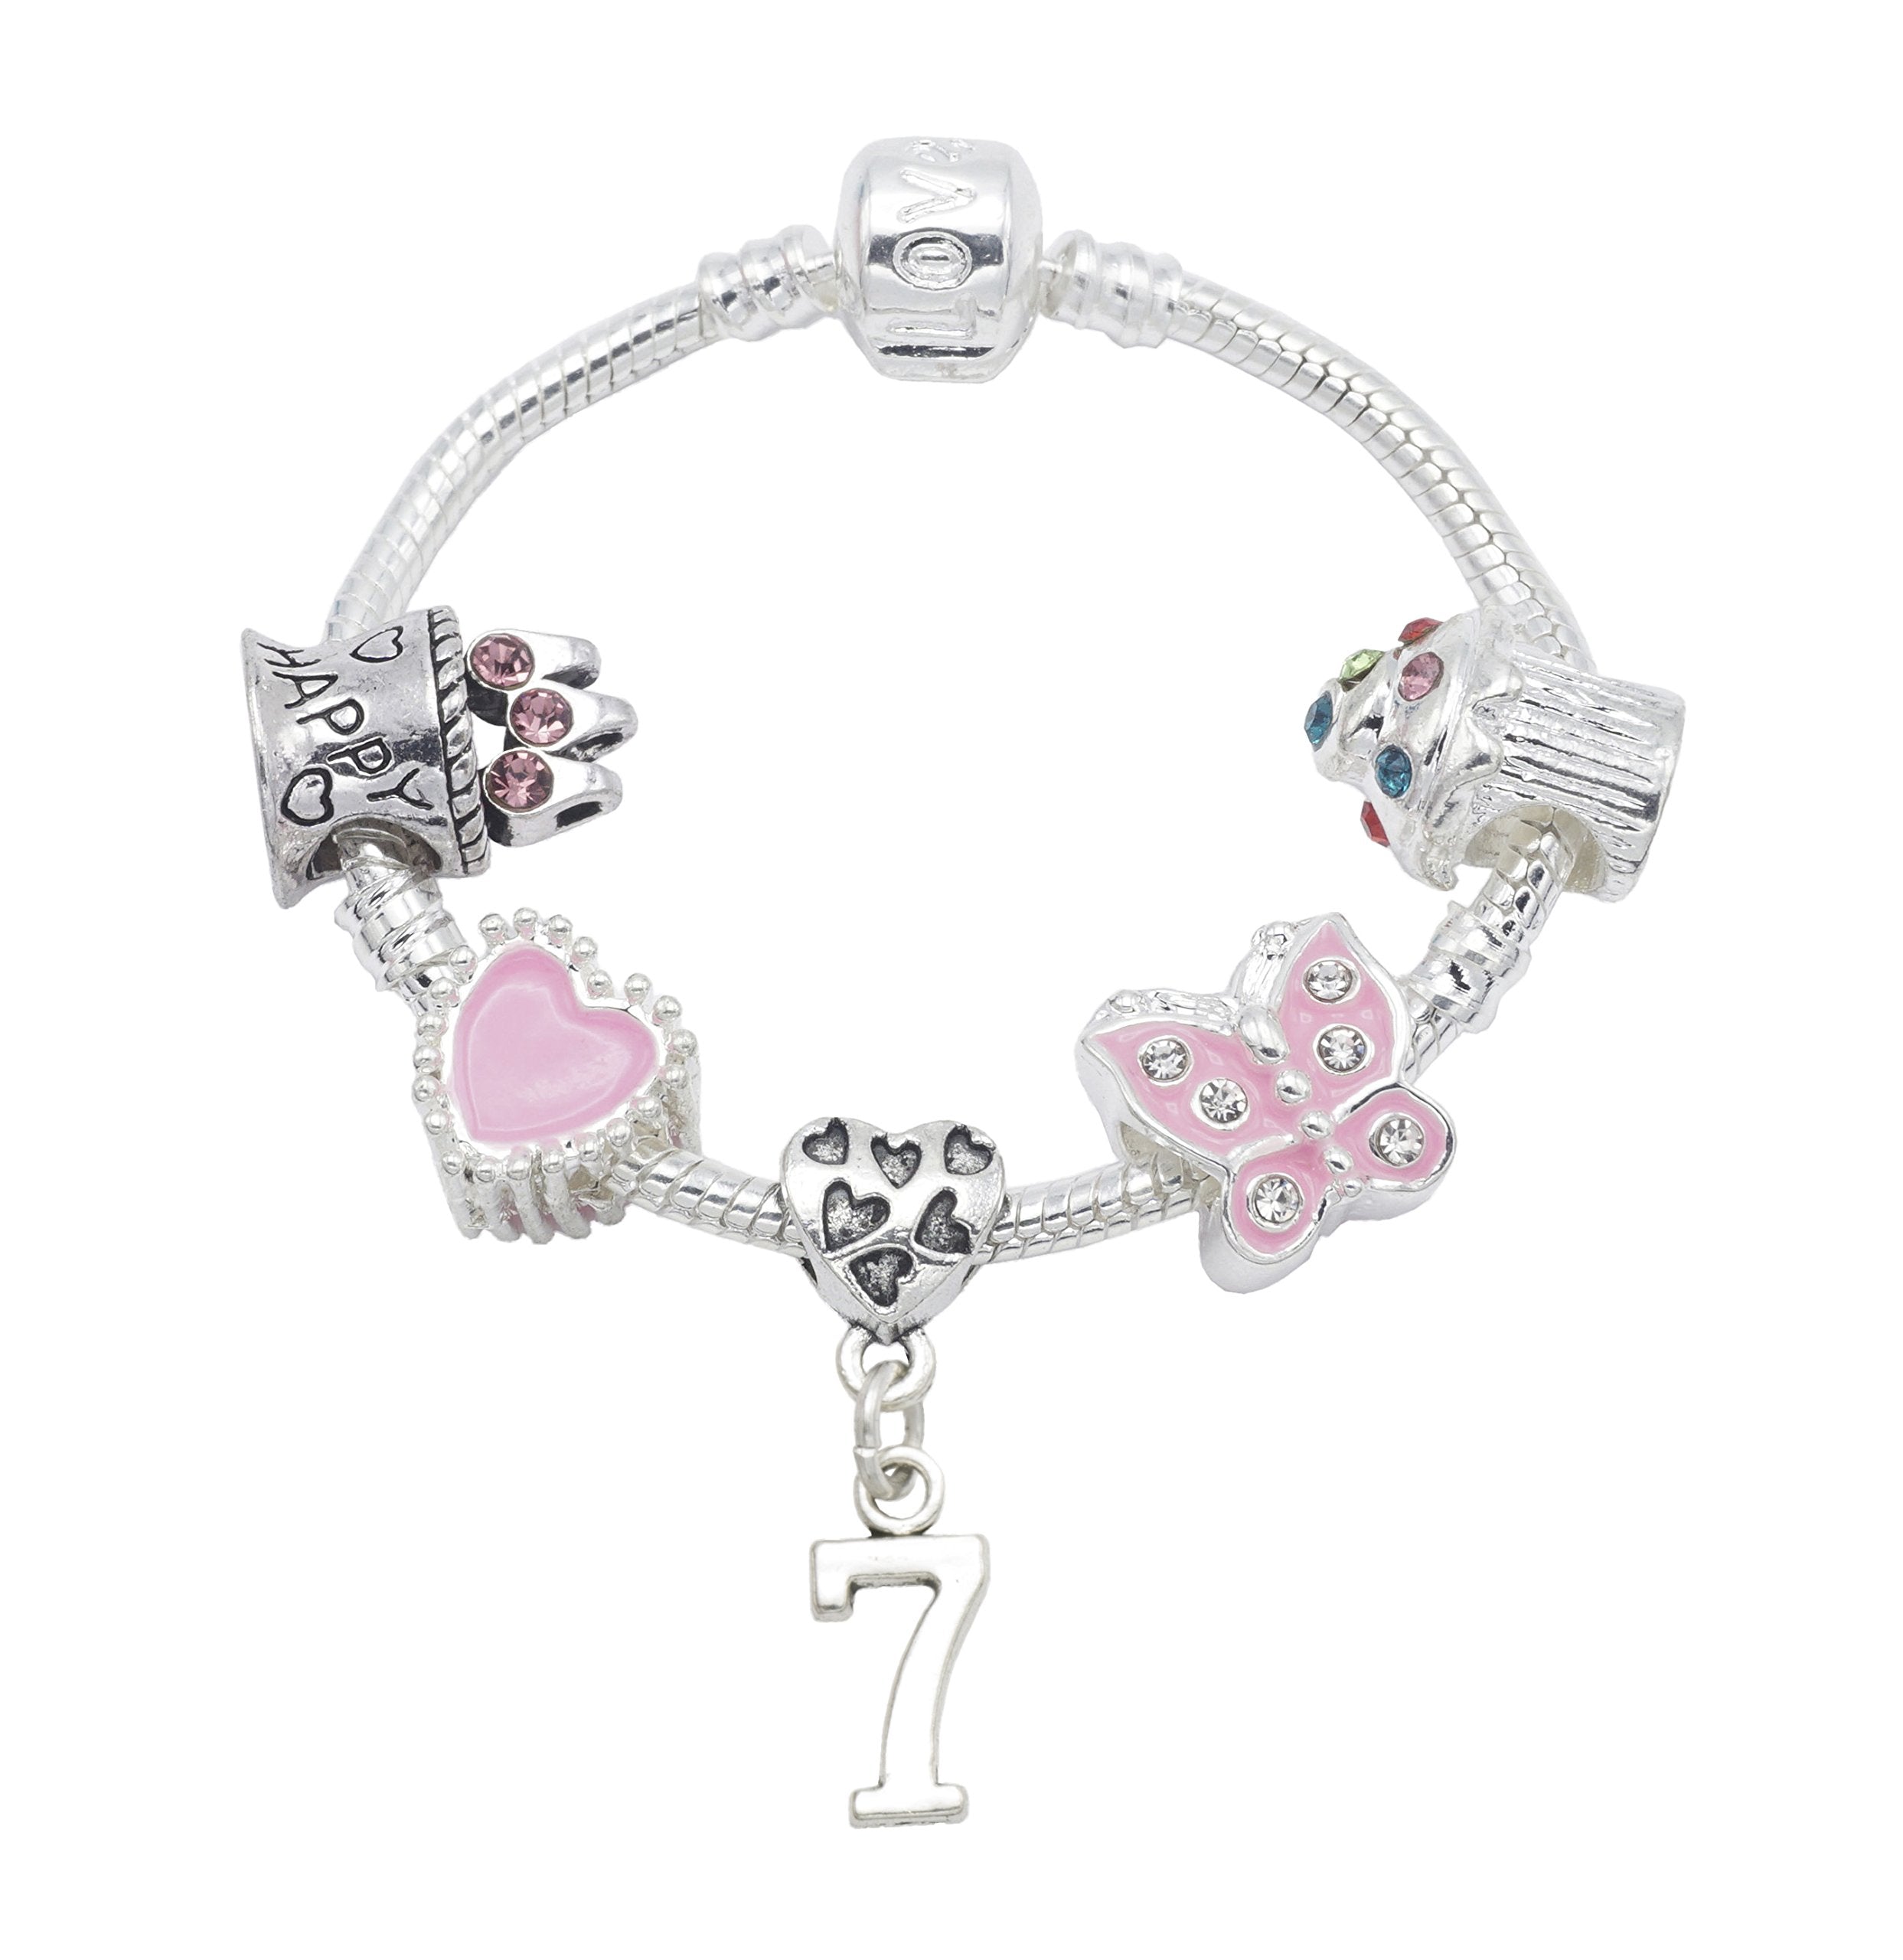 7th Birthday Silver Plated Charm Bracelet for Girls with Gift Box